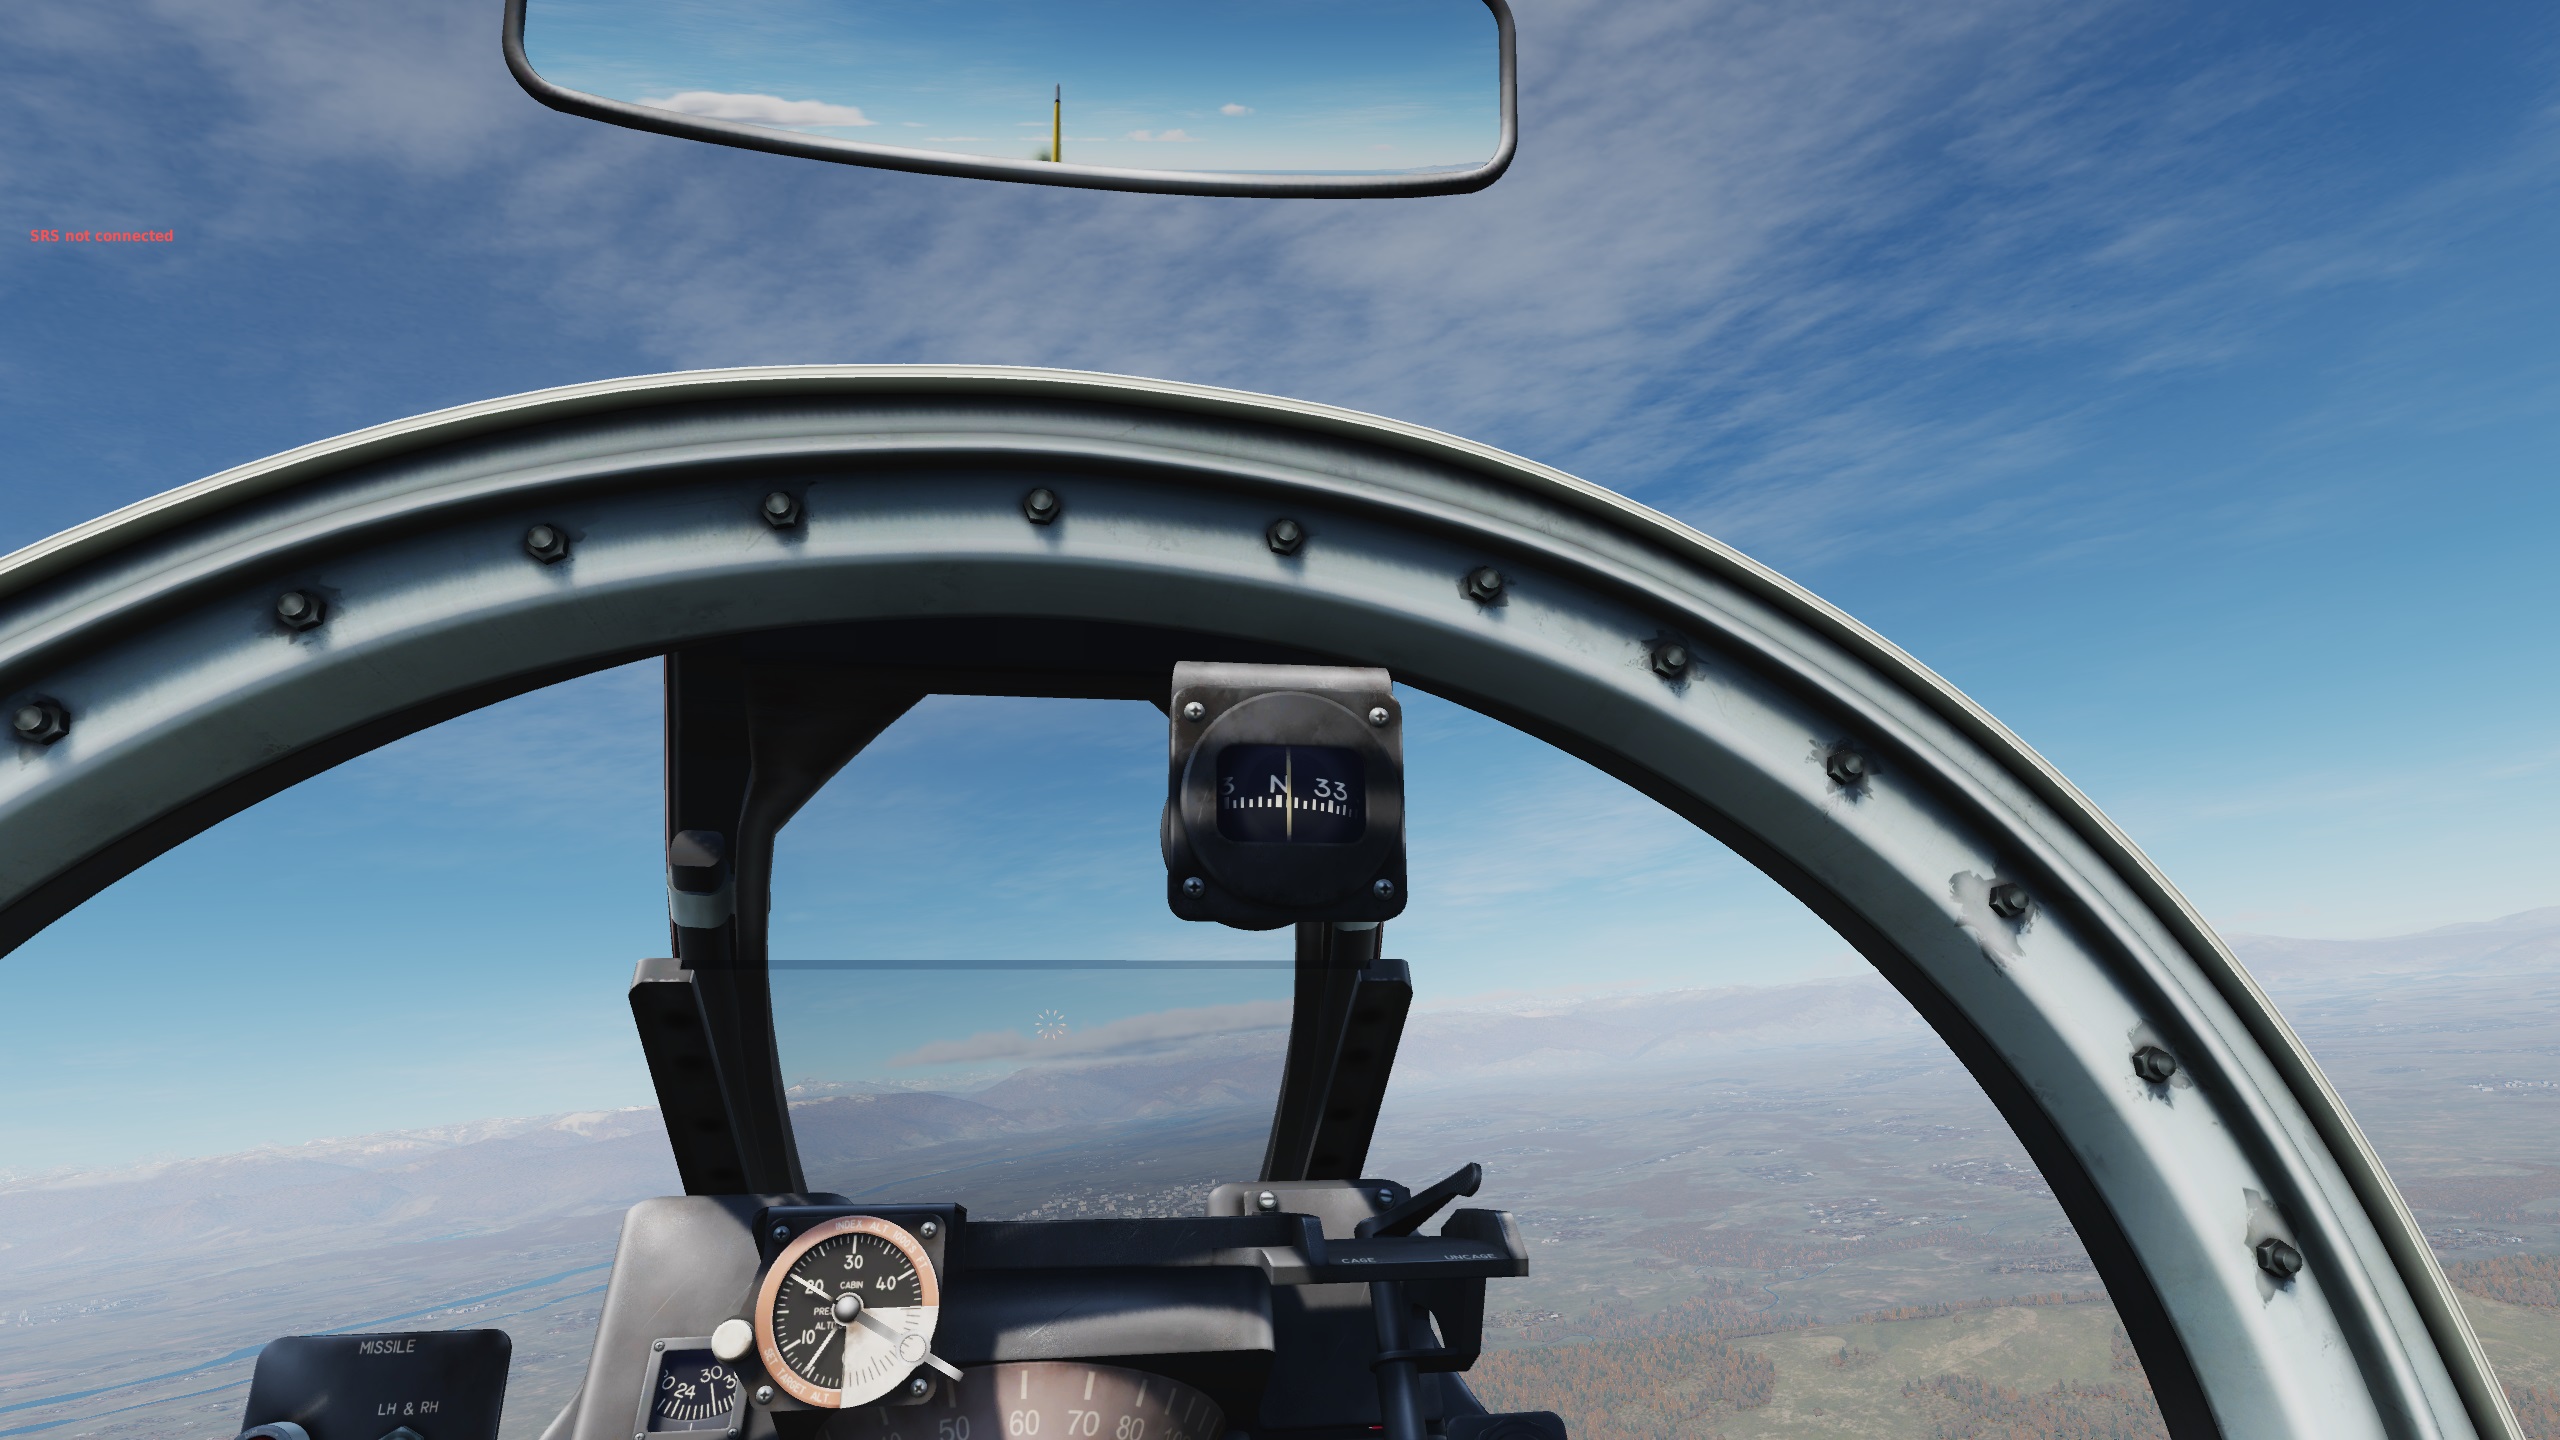 F-86F Canopy Clarity Mod - UPDATED 2022 Aug 29th